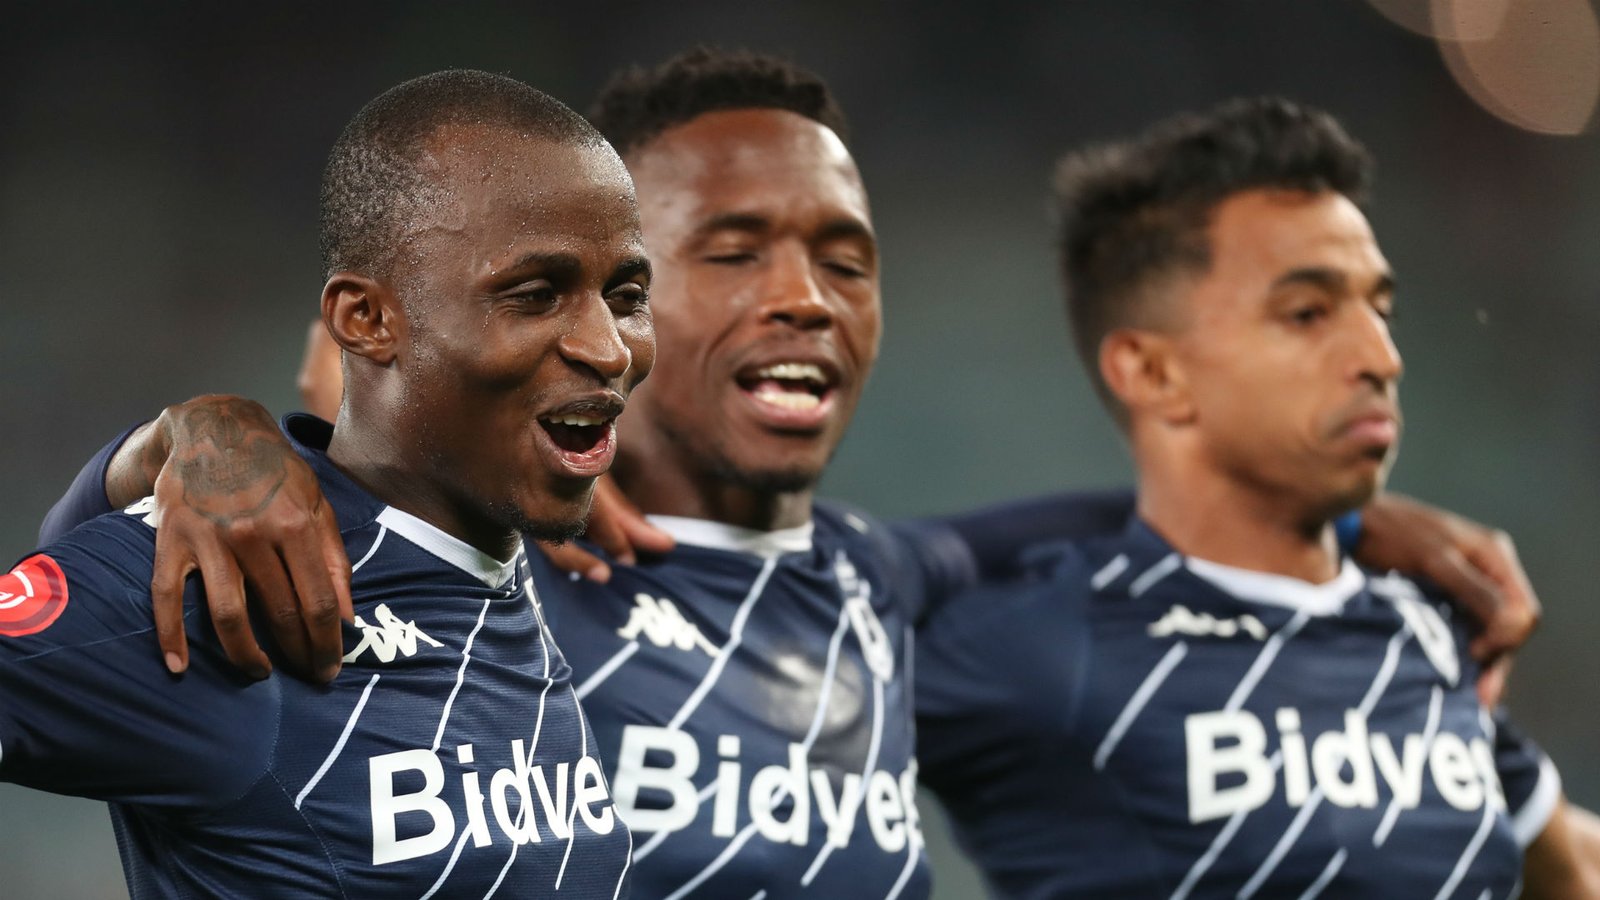 Bidvest Wits drawn in Group B for CAF Confederation Cup - Sports Leo